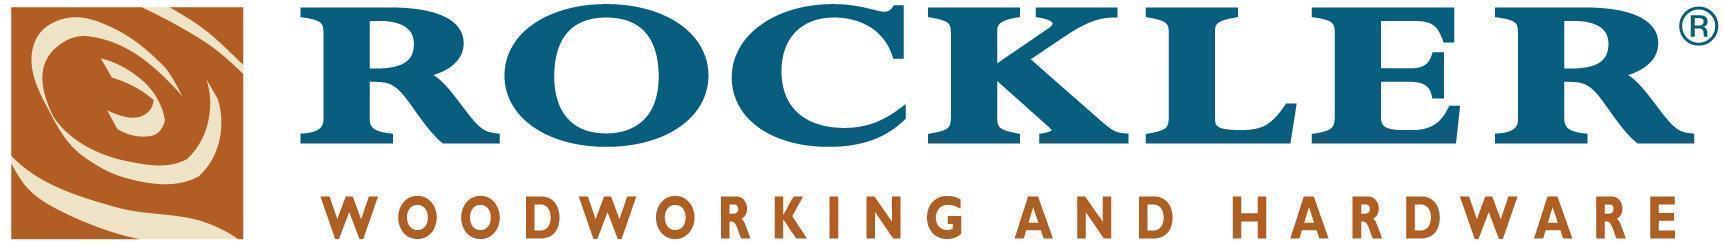 Rockler Companies, Inc Entry Level Jobs and Internships